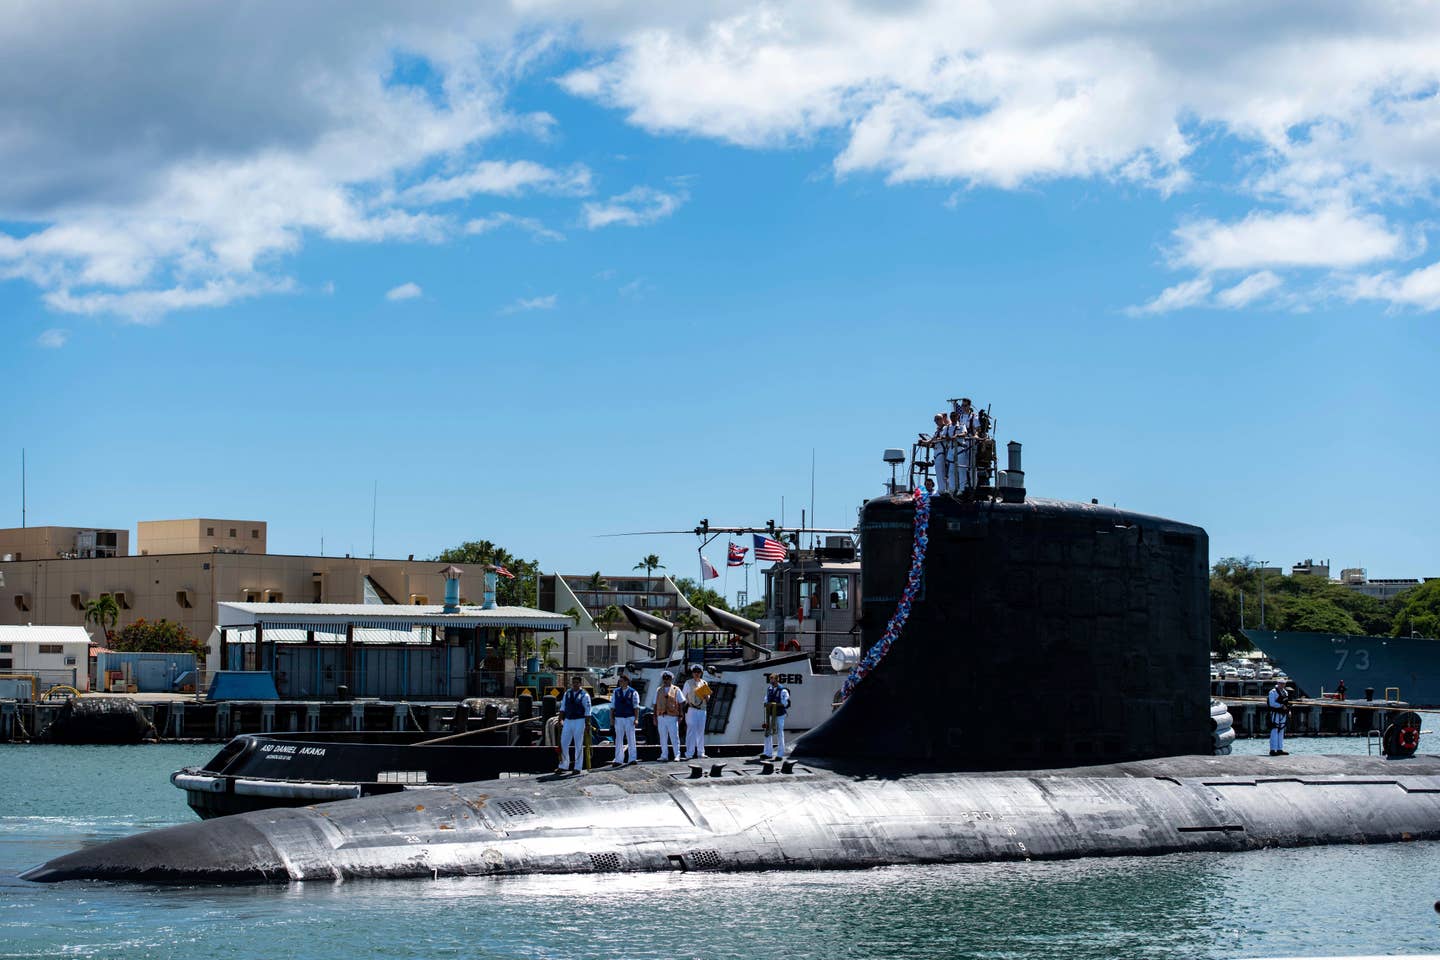 The <em>Virginia</em> class fast-attack submarine <em>USS Illinois</em> (SSN 786) returns home to Joint Base Pearl Harbor-Hickam from a deployment in the 7th Fleet area of responsibility on Sept. 13, 2021. (Mass Communication Specialist 1st Class Michael B. Zingaro/U.S. Navy via AP)